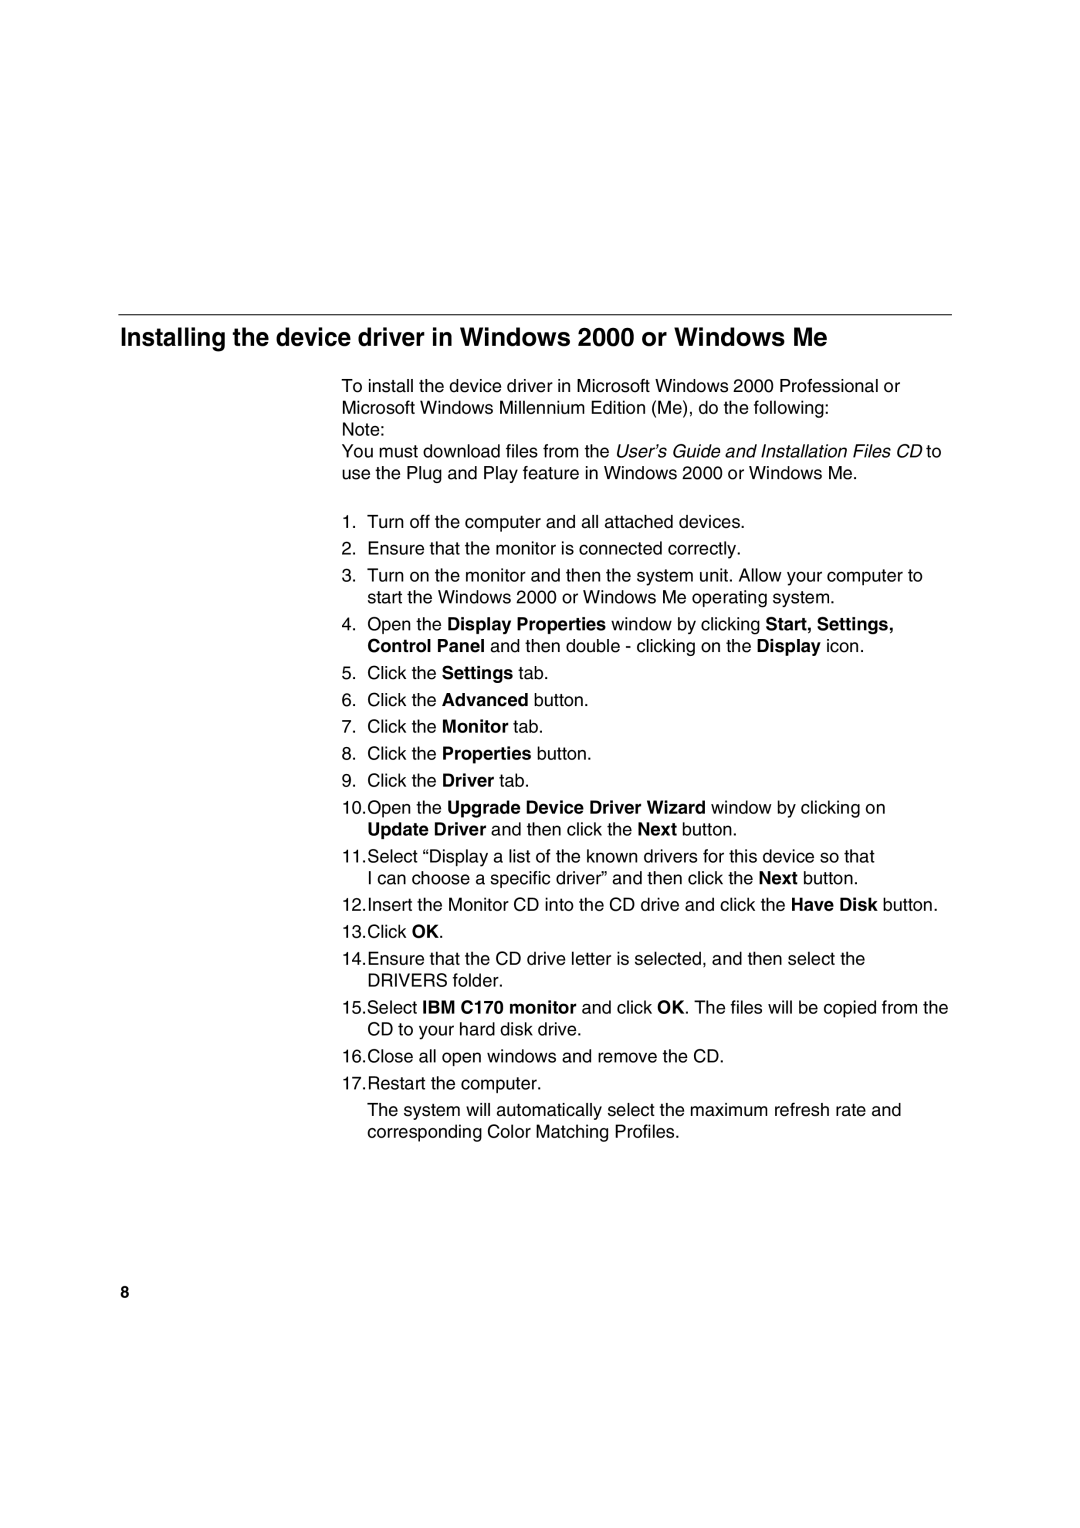 IBM C170 manual Installing the device driver in Windows 2000 or Windows Me 